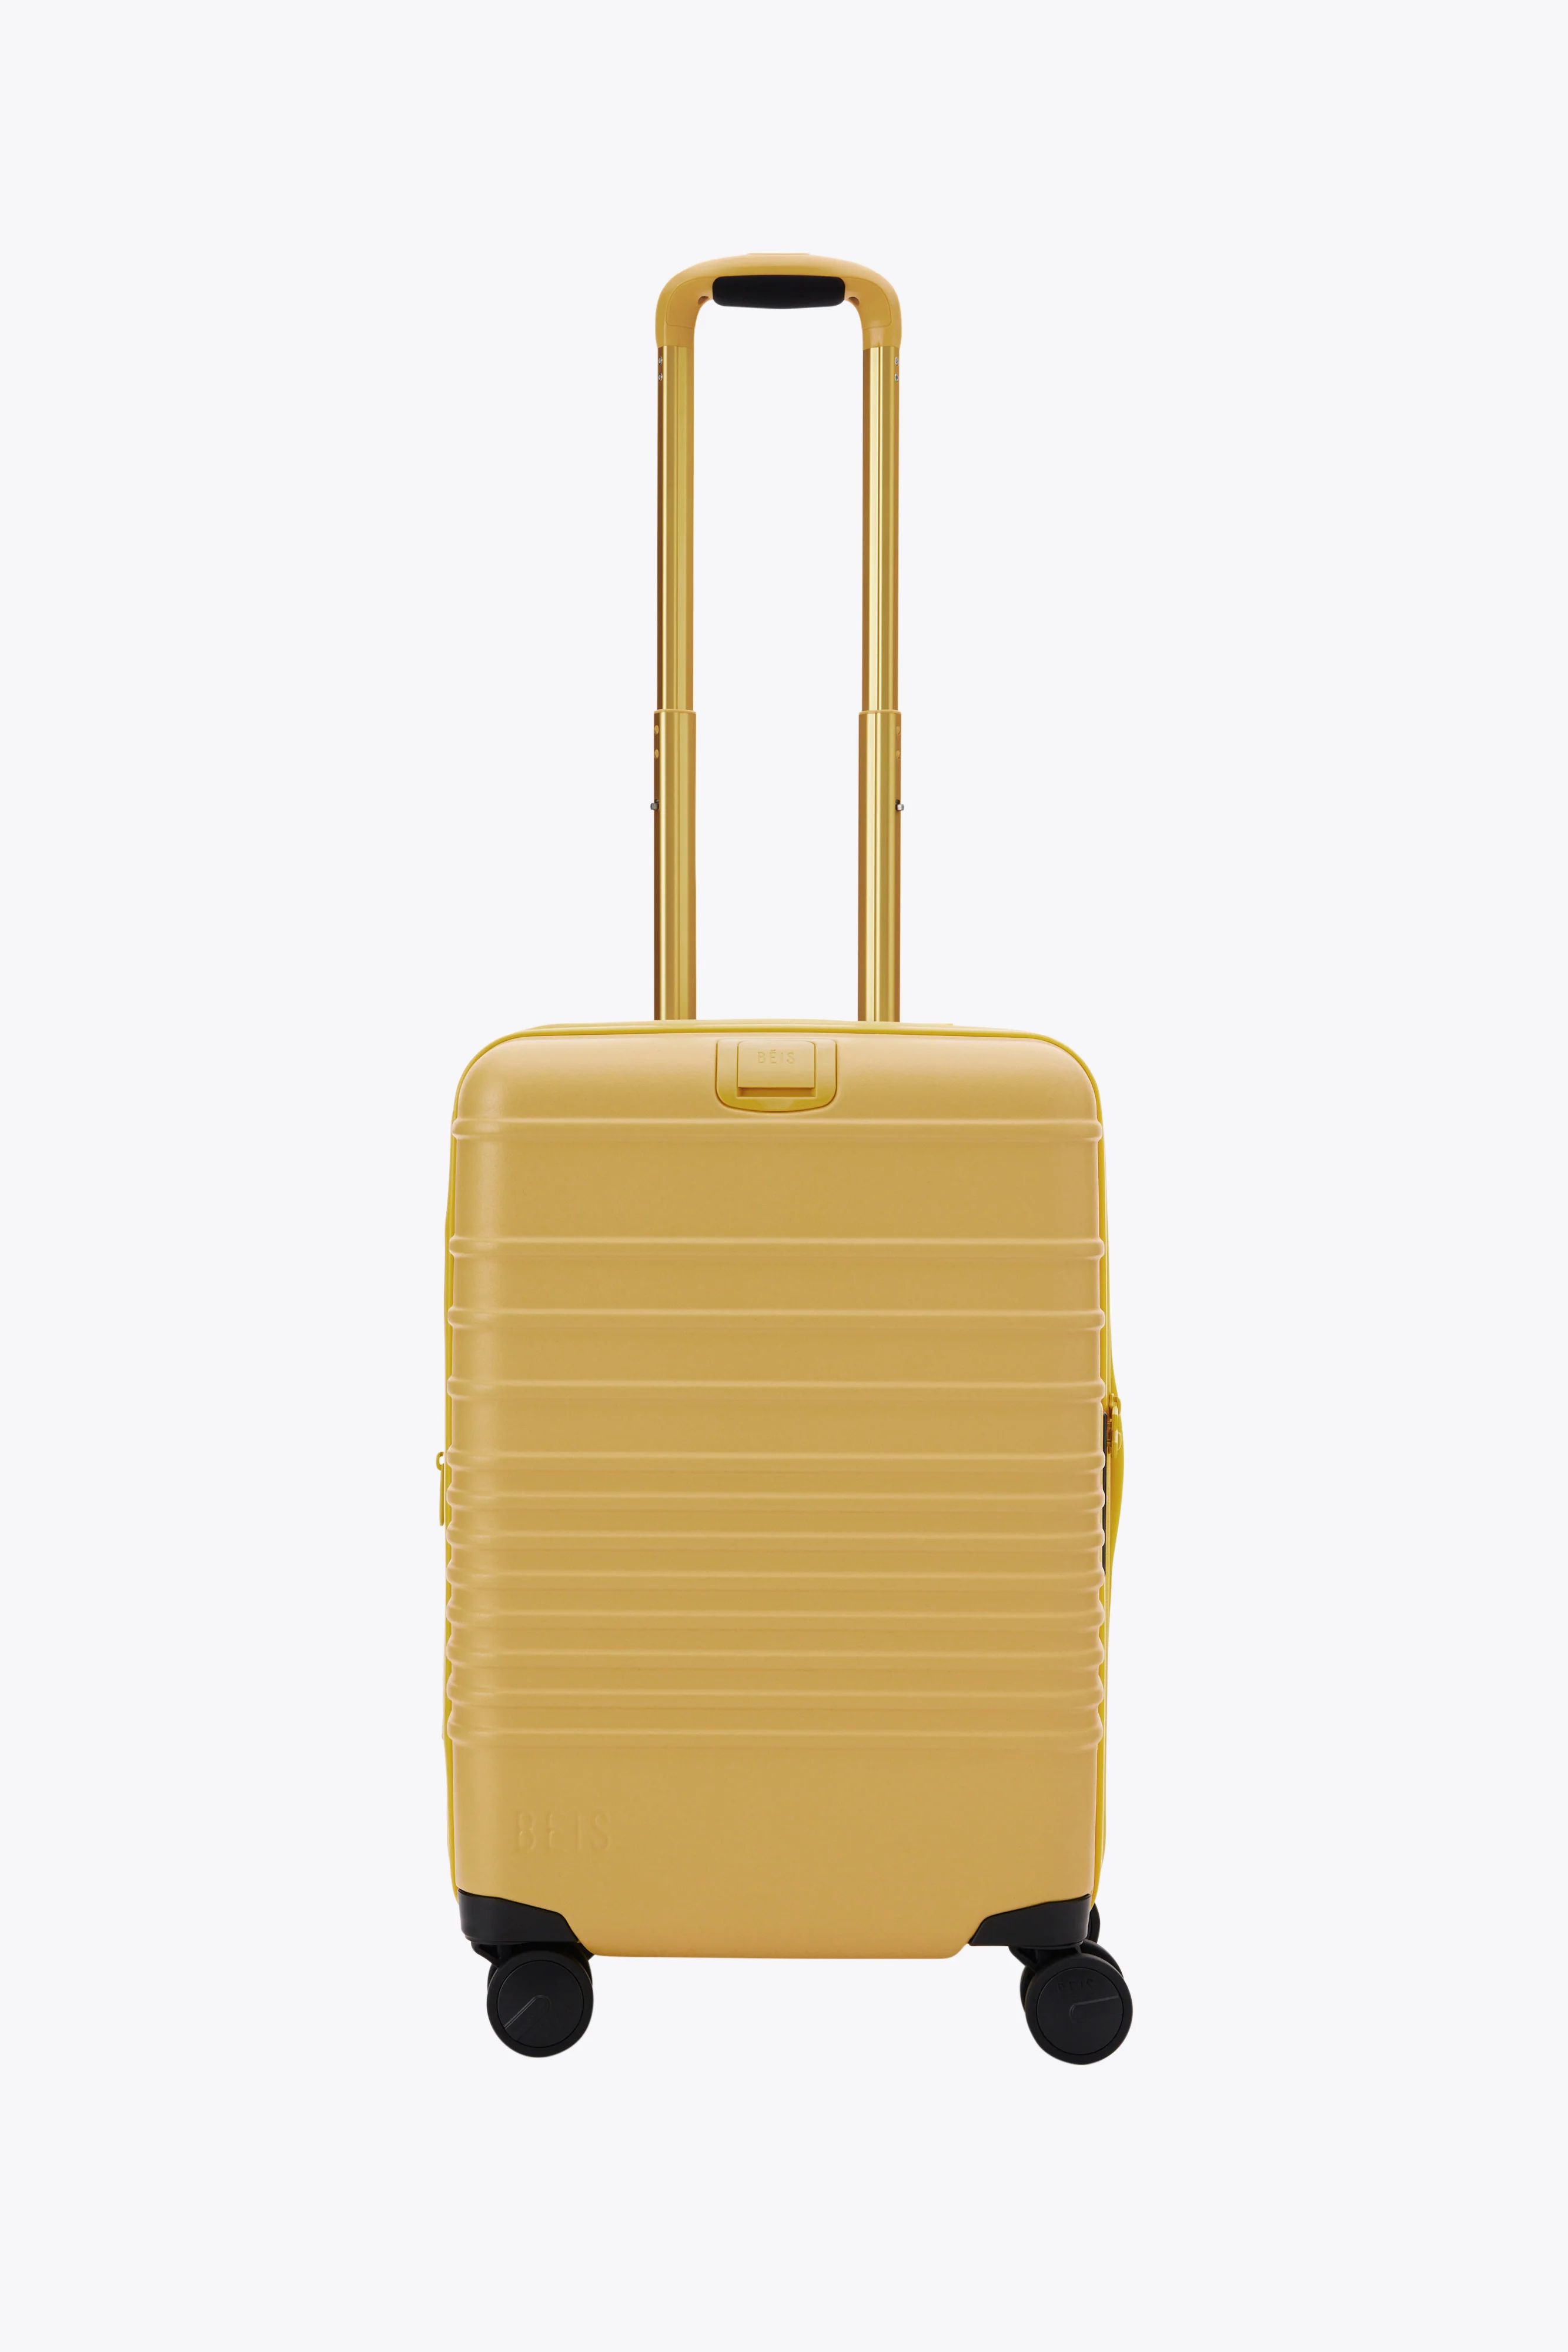 BÉIS 'The Carry-On Roller' in Honey - 21" Carry On Luggage & Carry On Suitcase in Yellow | BÉIS Travel